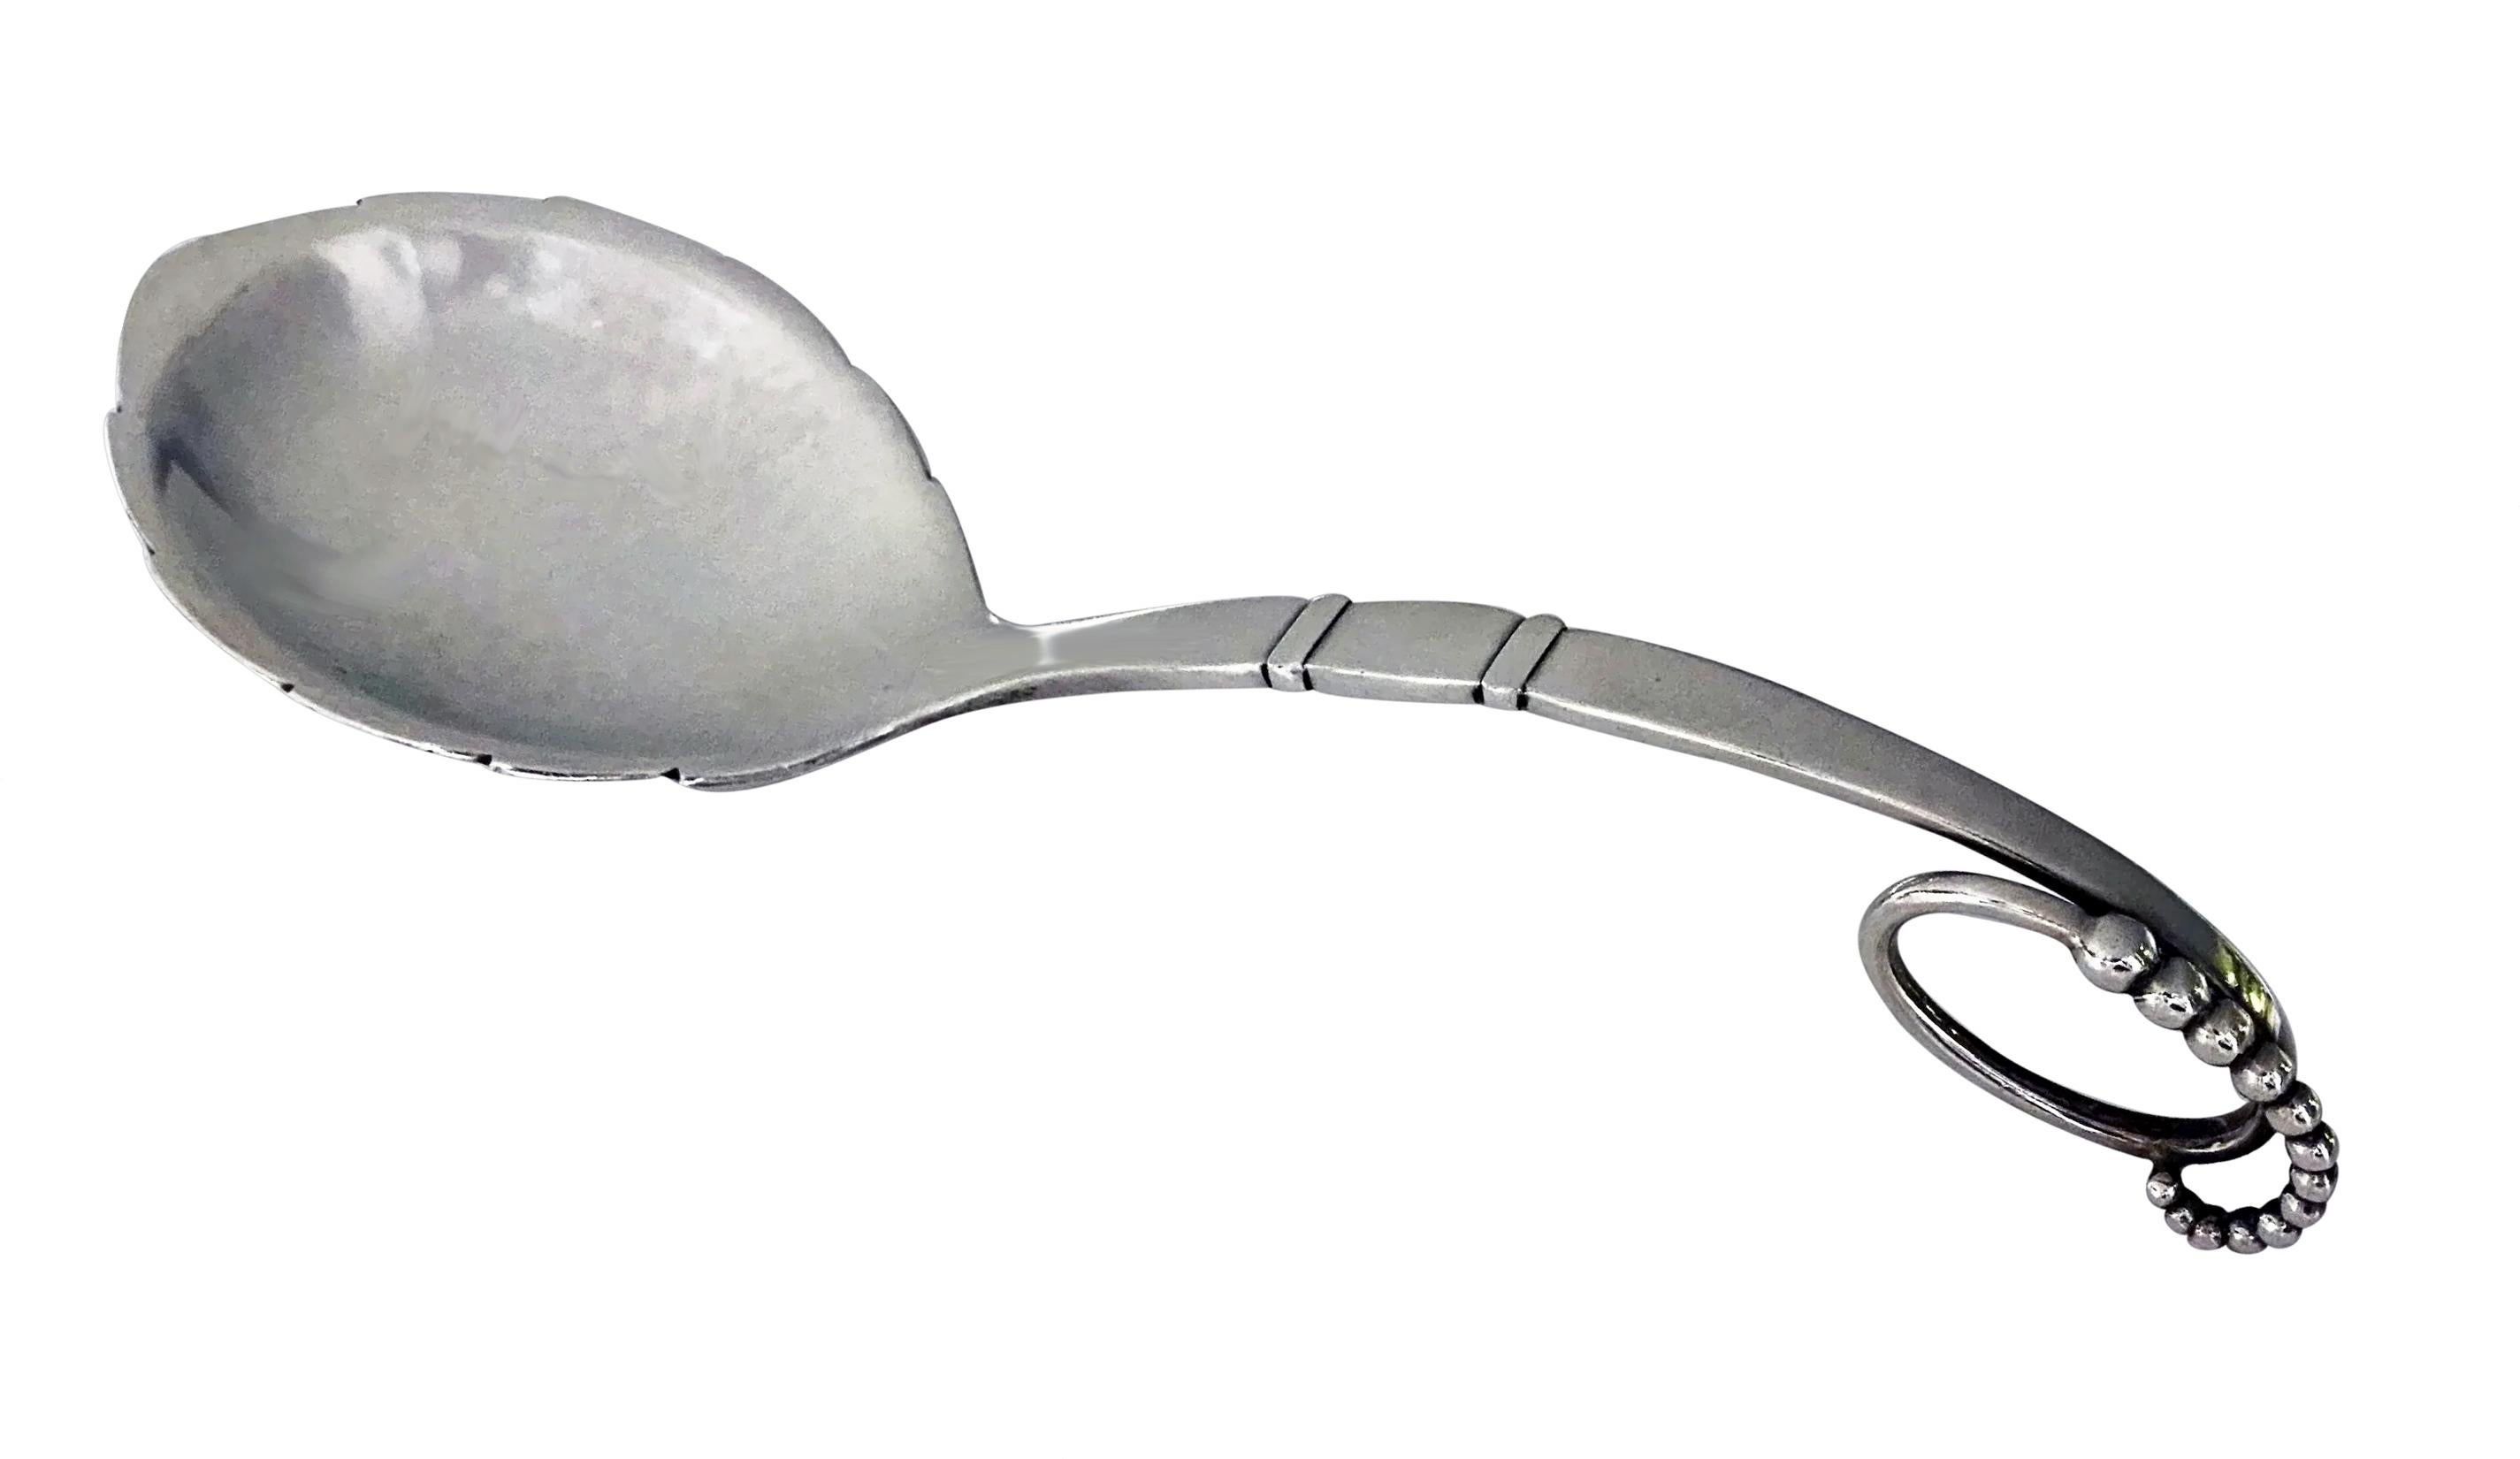 Georg Jensen Blossom Pattern Serving Spoon Ladle Sterling silver Denmark, C.1935. With leaf-form bowl, stamped with GJ mark, 41, Sterling Denmark. Length: 8 inches. Weight: 78 grams. (2.50 oz.)